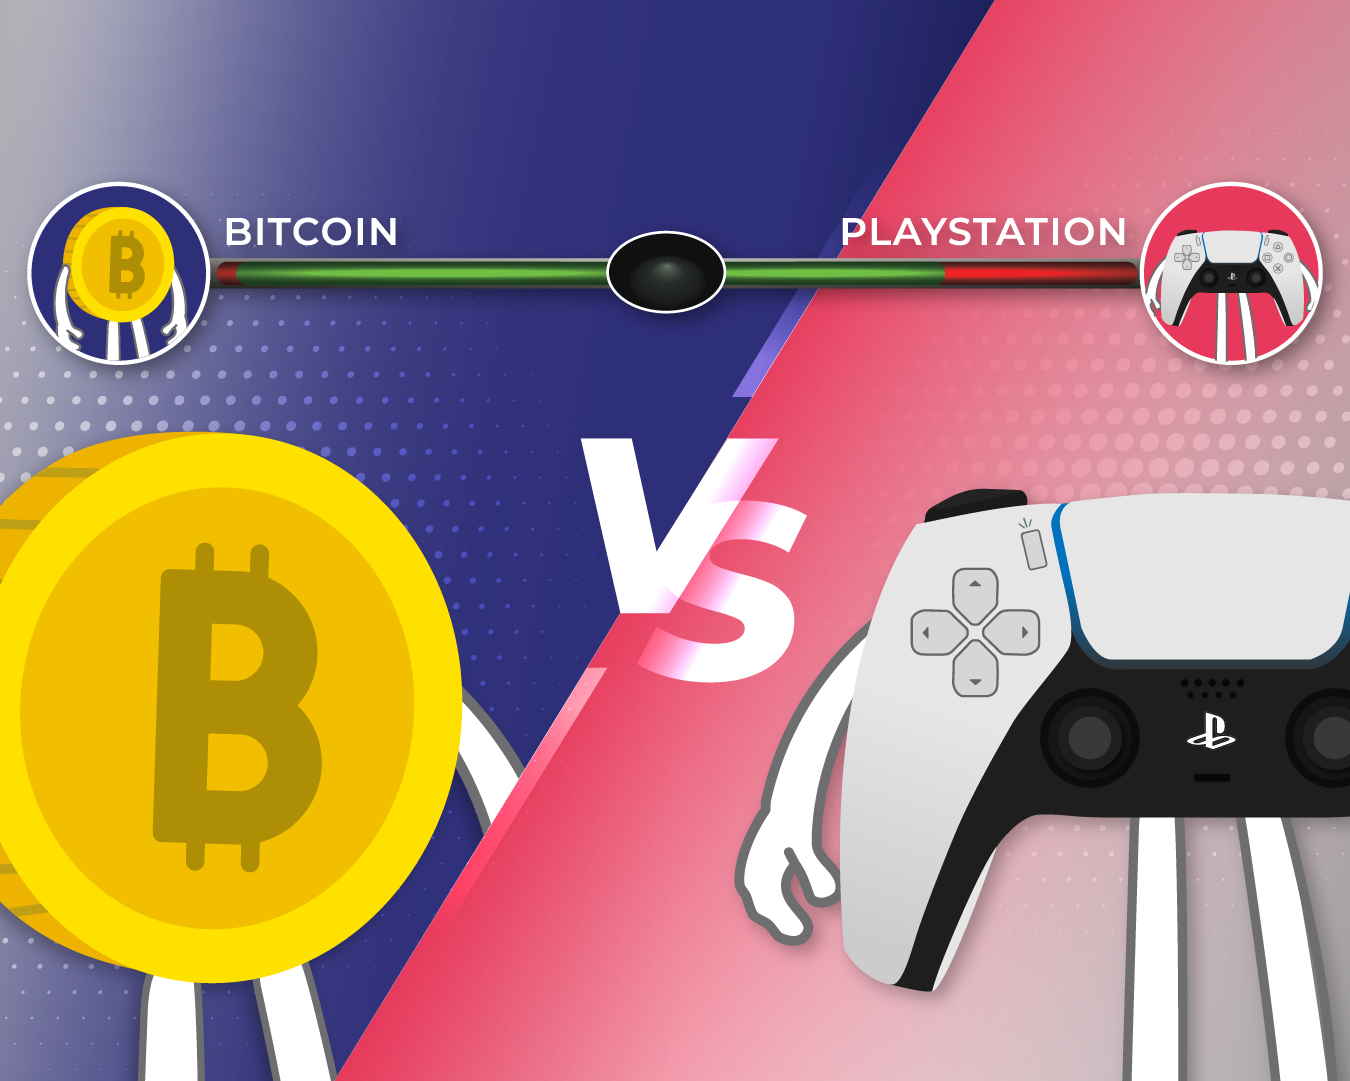 A History Of Bitcoin’s Prices Compared To Playstations